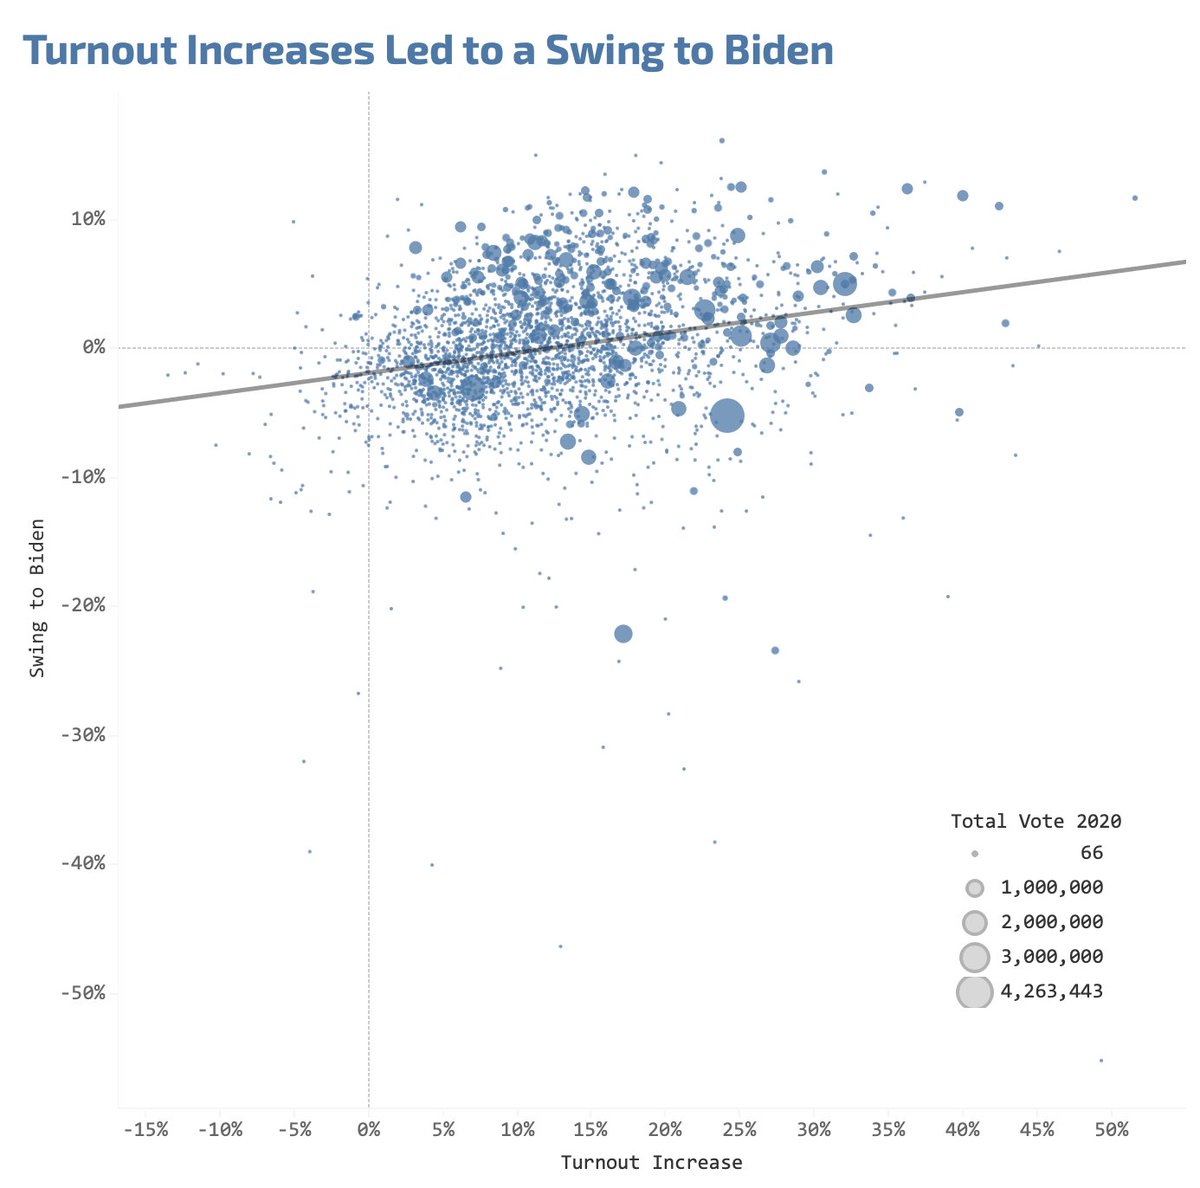 Turnout increases led to a swing to Biden nationally, though there were plenty of new votes for Trump in this bunch and who benefits from higher turnout is cycle-specific. The trendline implies that Biden won the 20M new voters in 2020 by about 15 points.